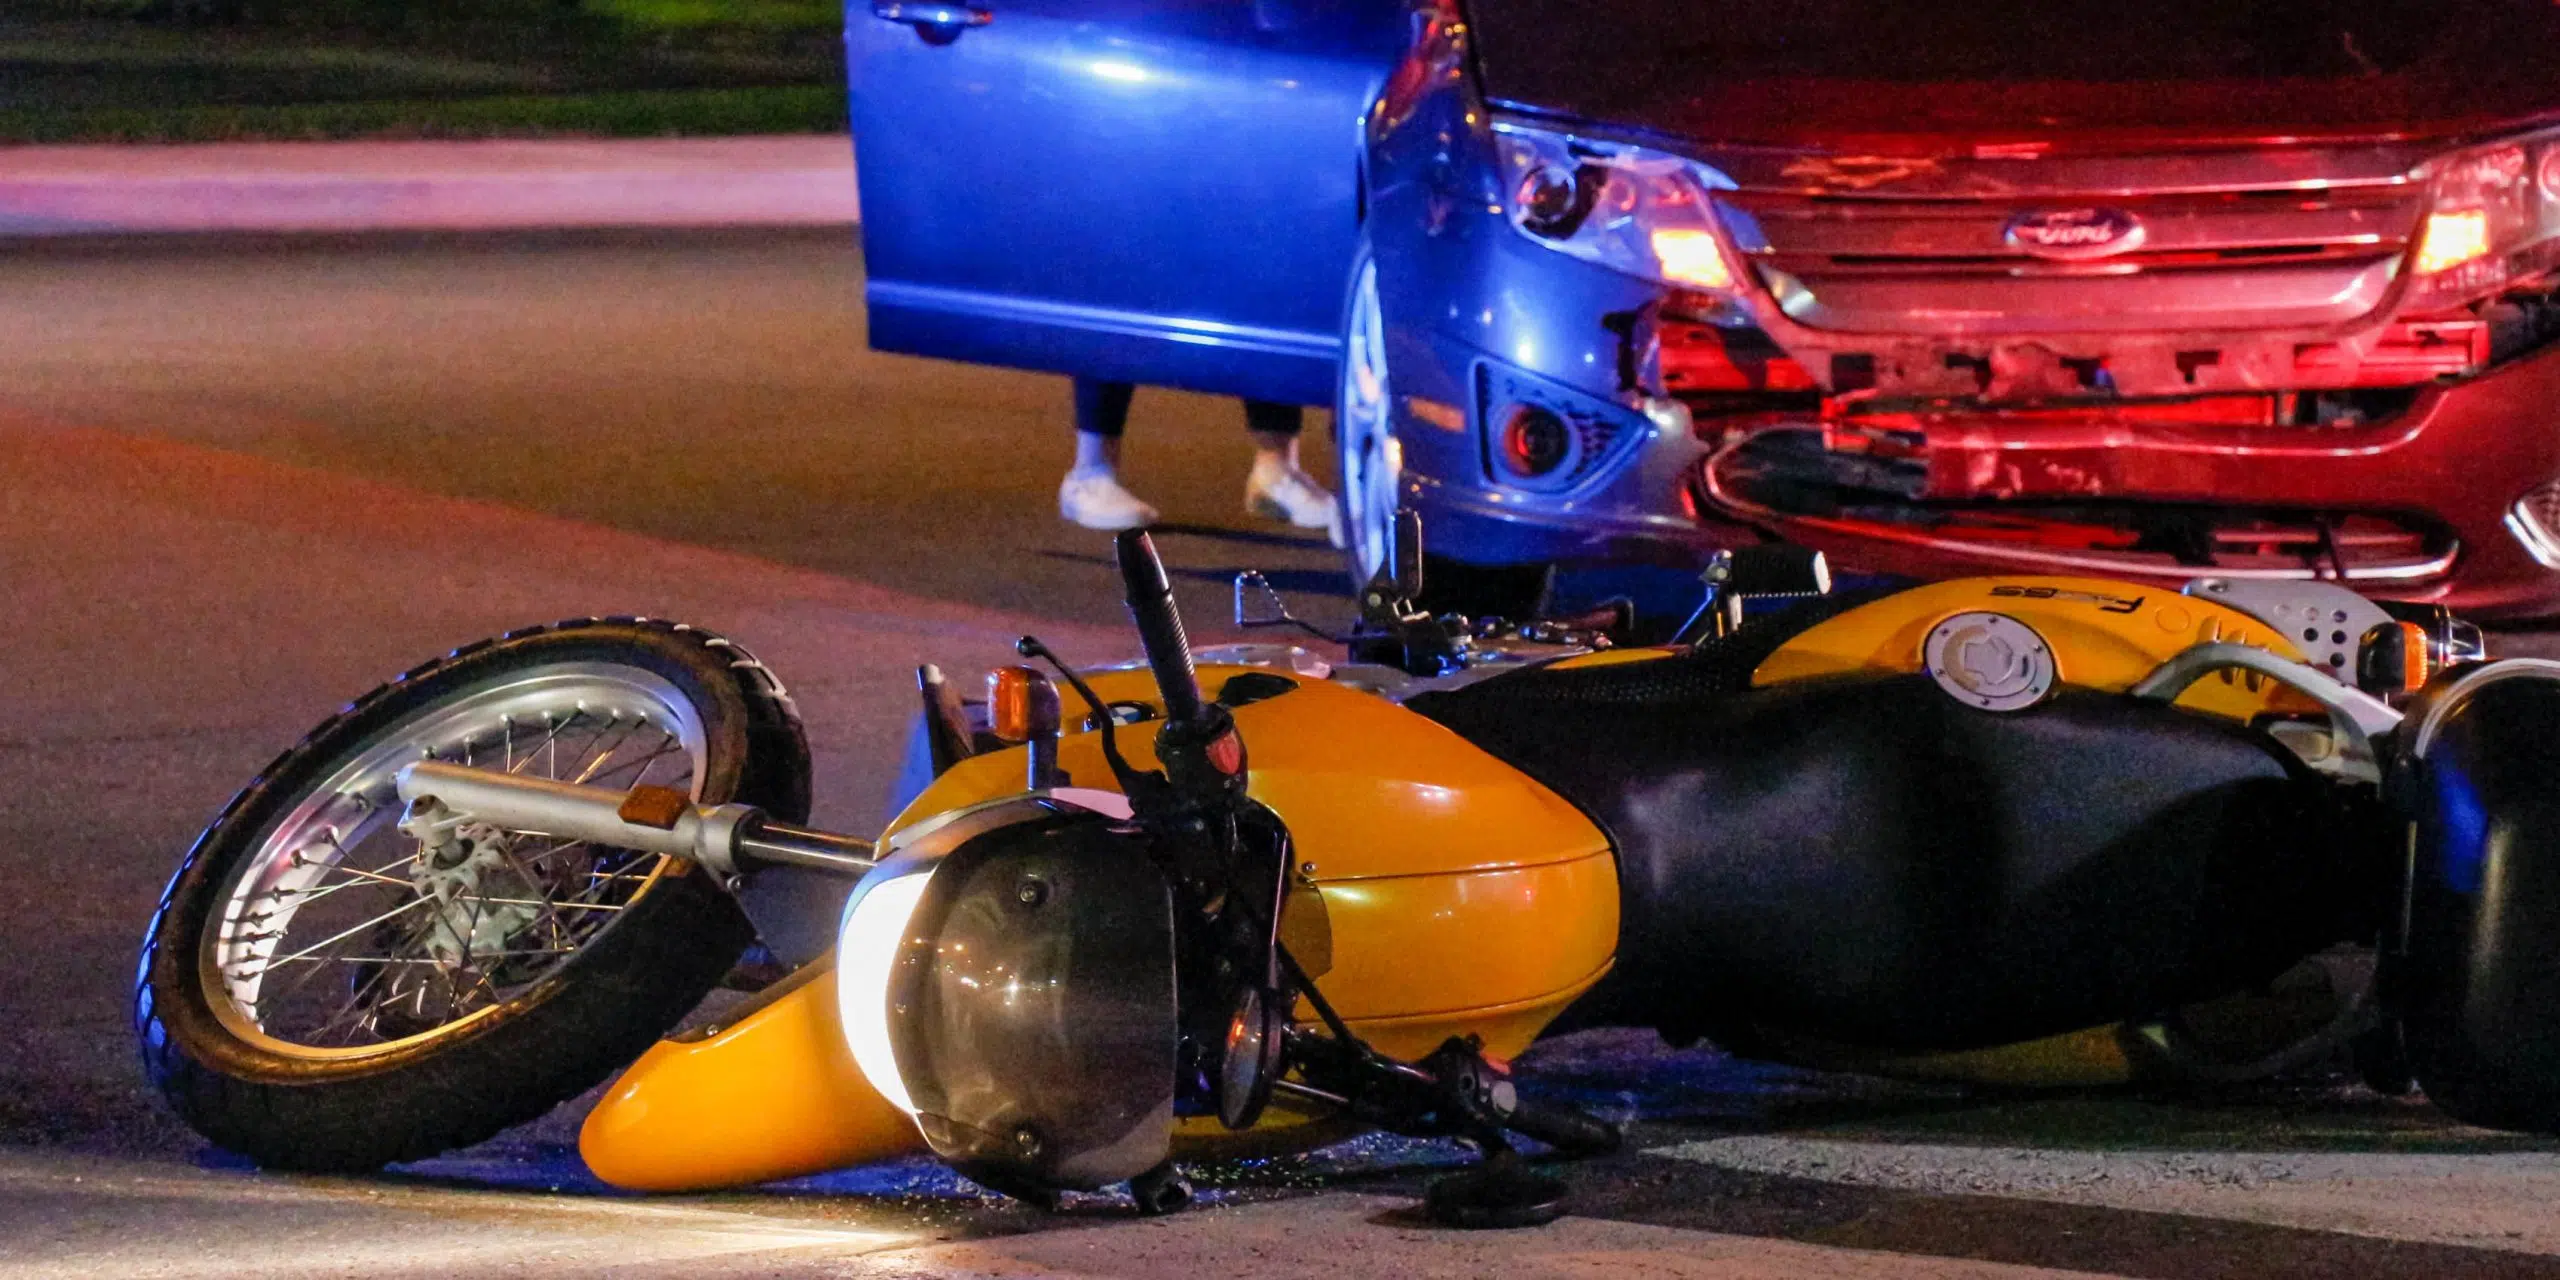 One in Hospital After Car Collides with Motorcycle Near University